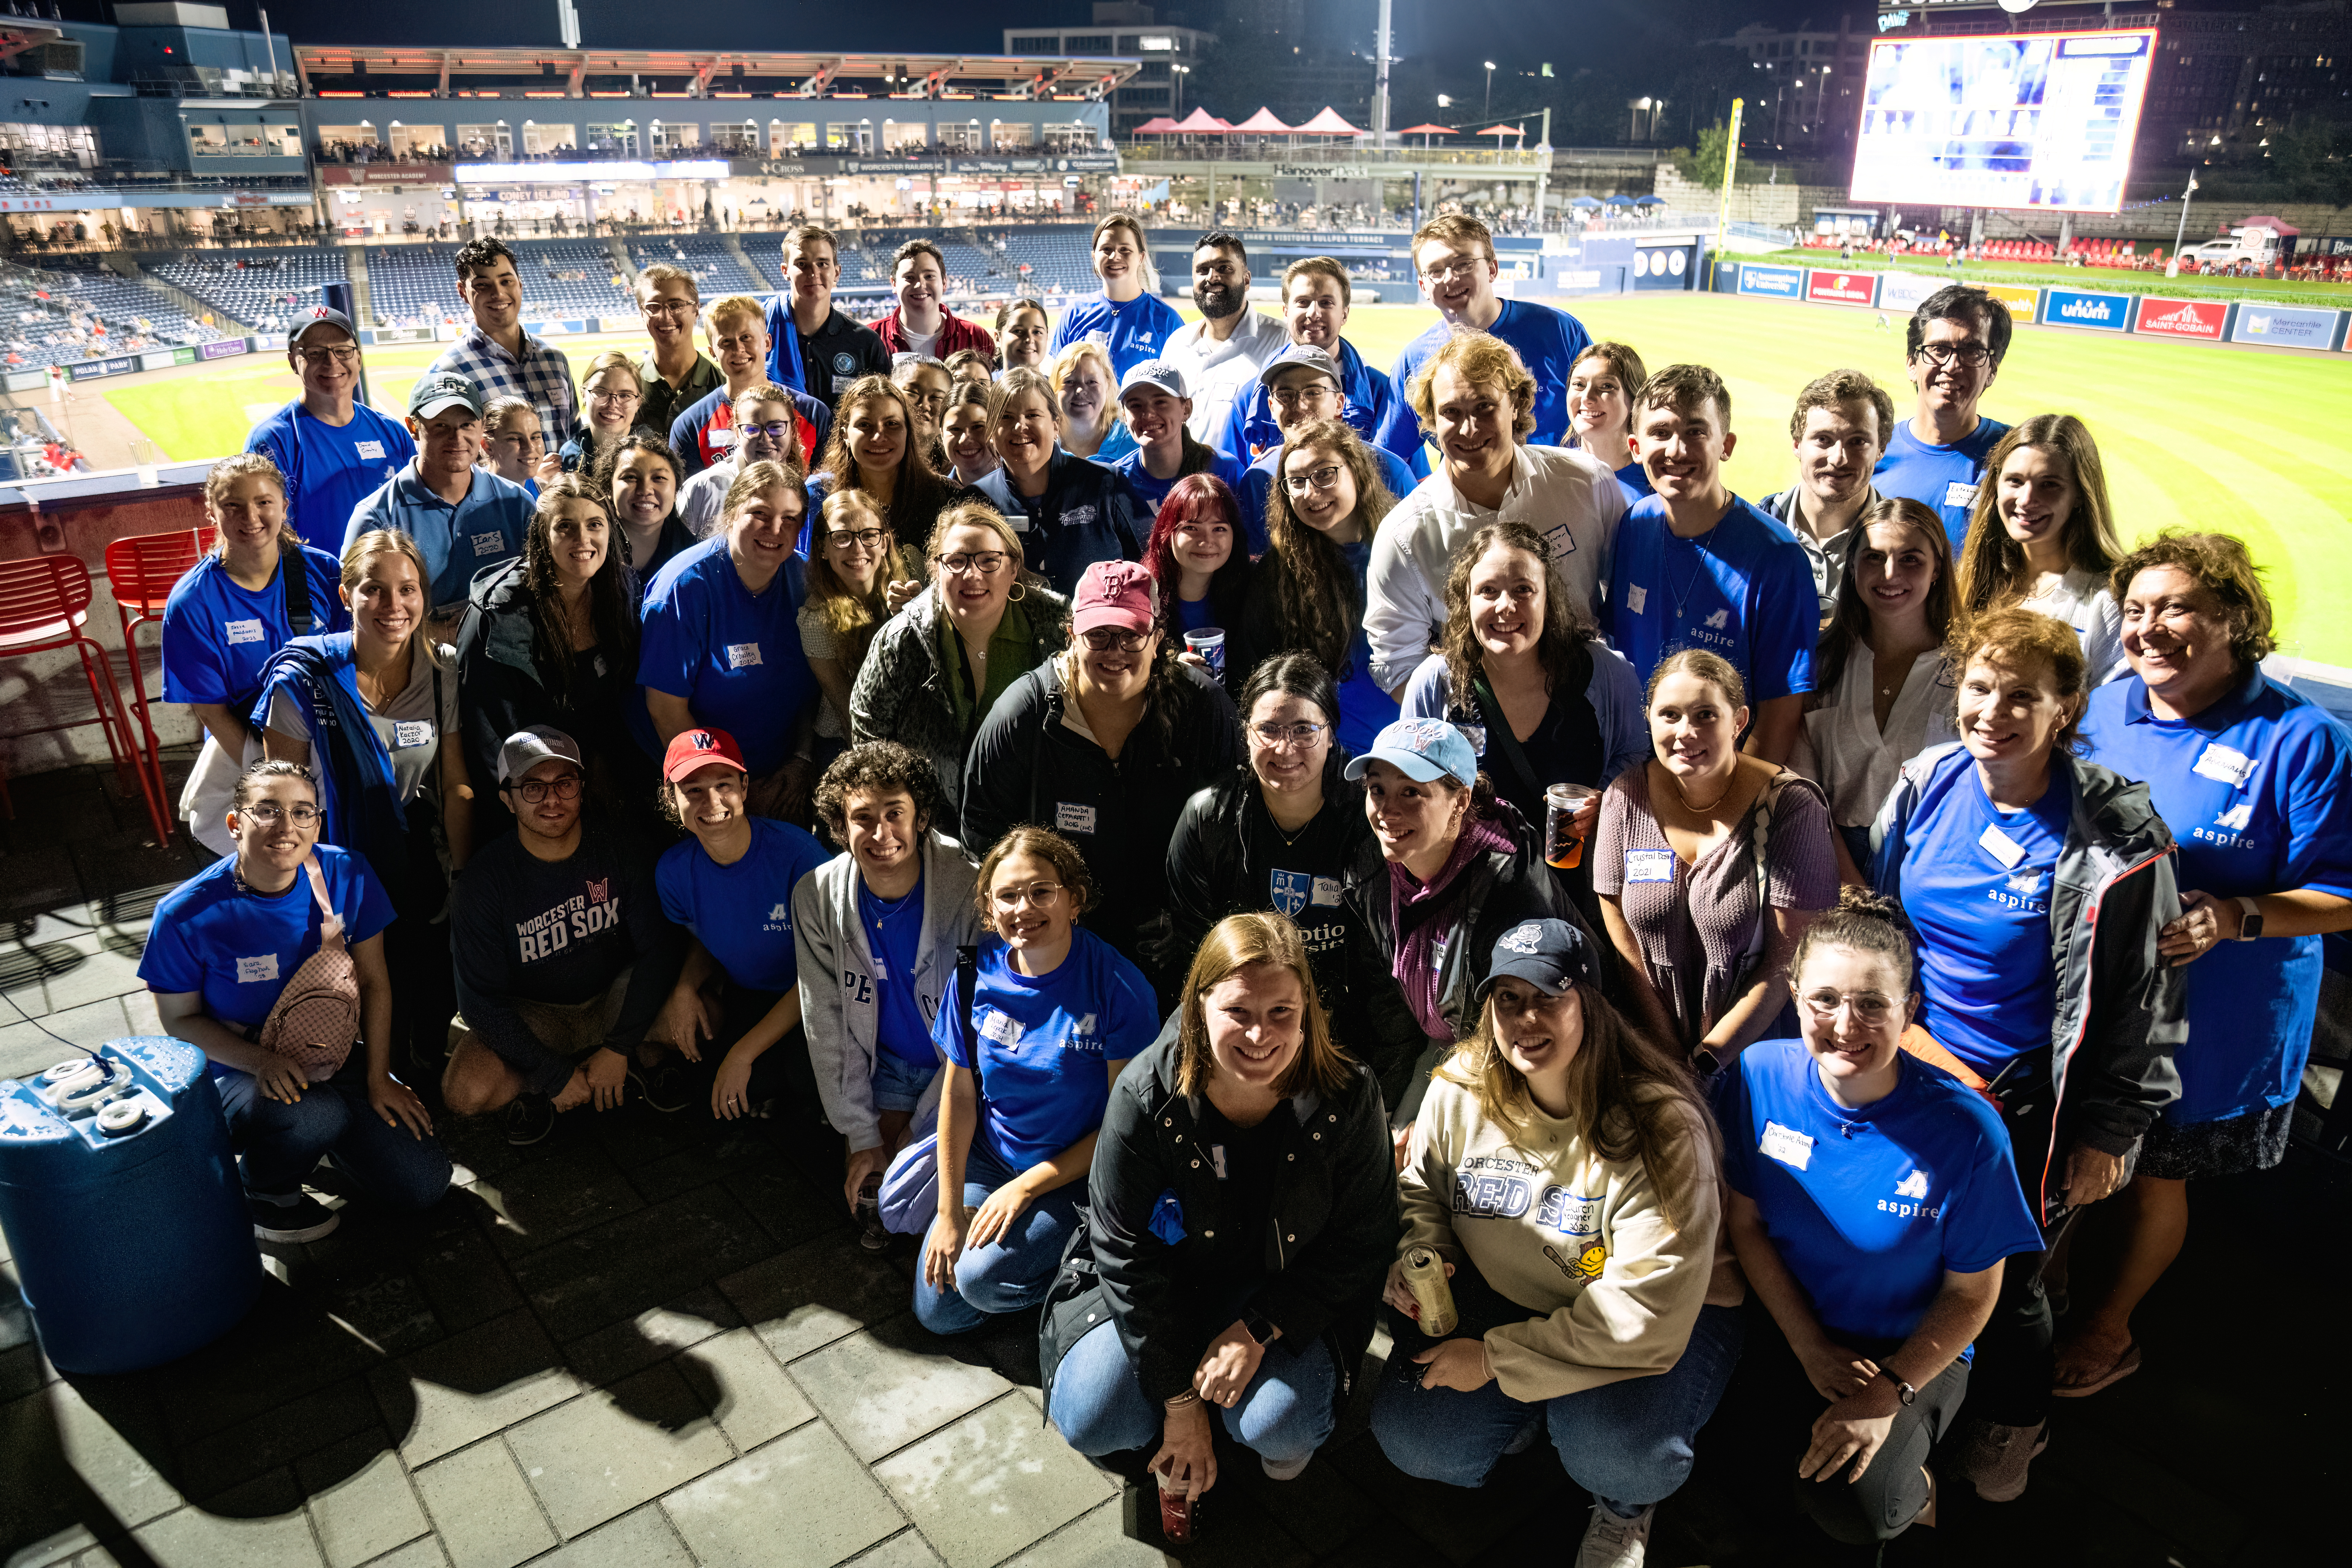 Assumption University's ASPIRE program faculty, students, and alumni attend a Worcester Red Sox game.